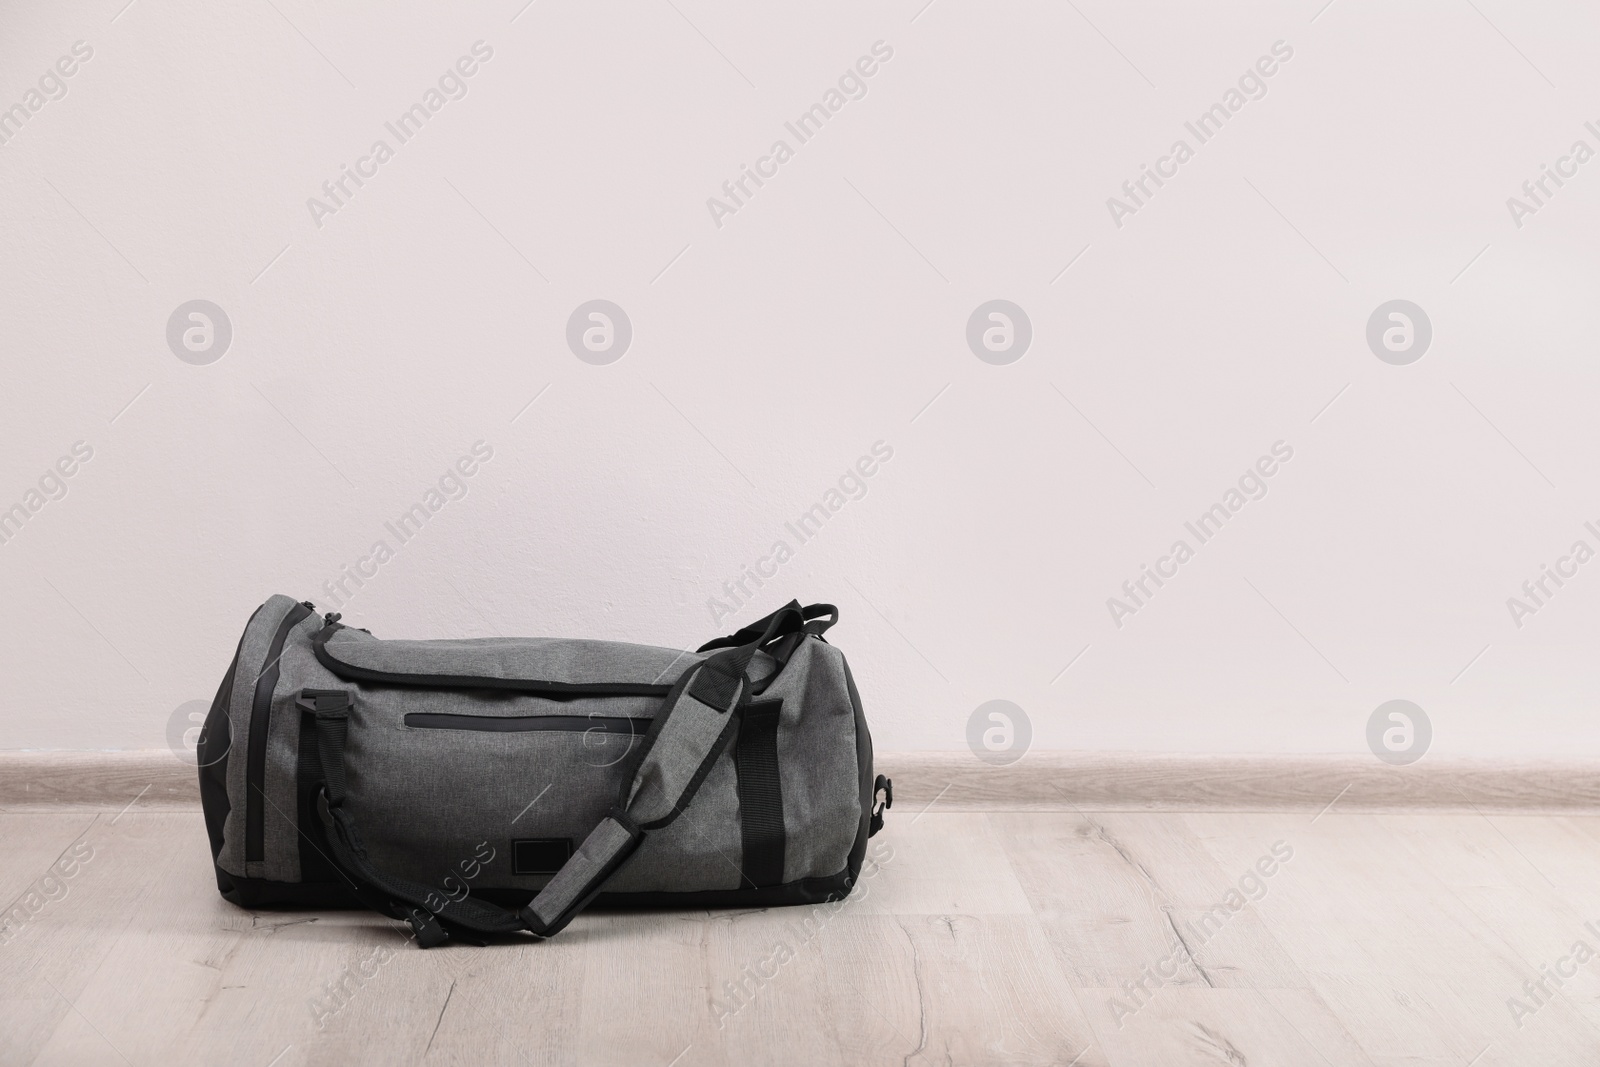 Photo of Grey sports bag on floor near white wall, space for text